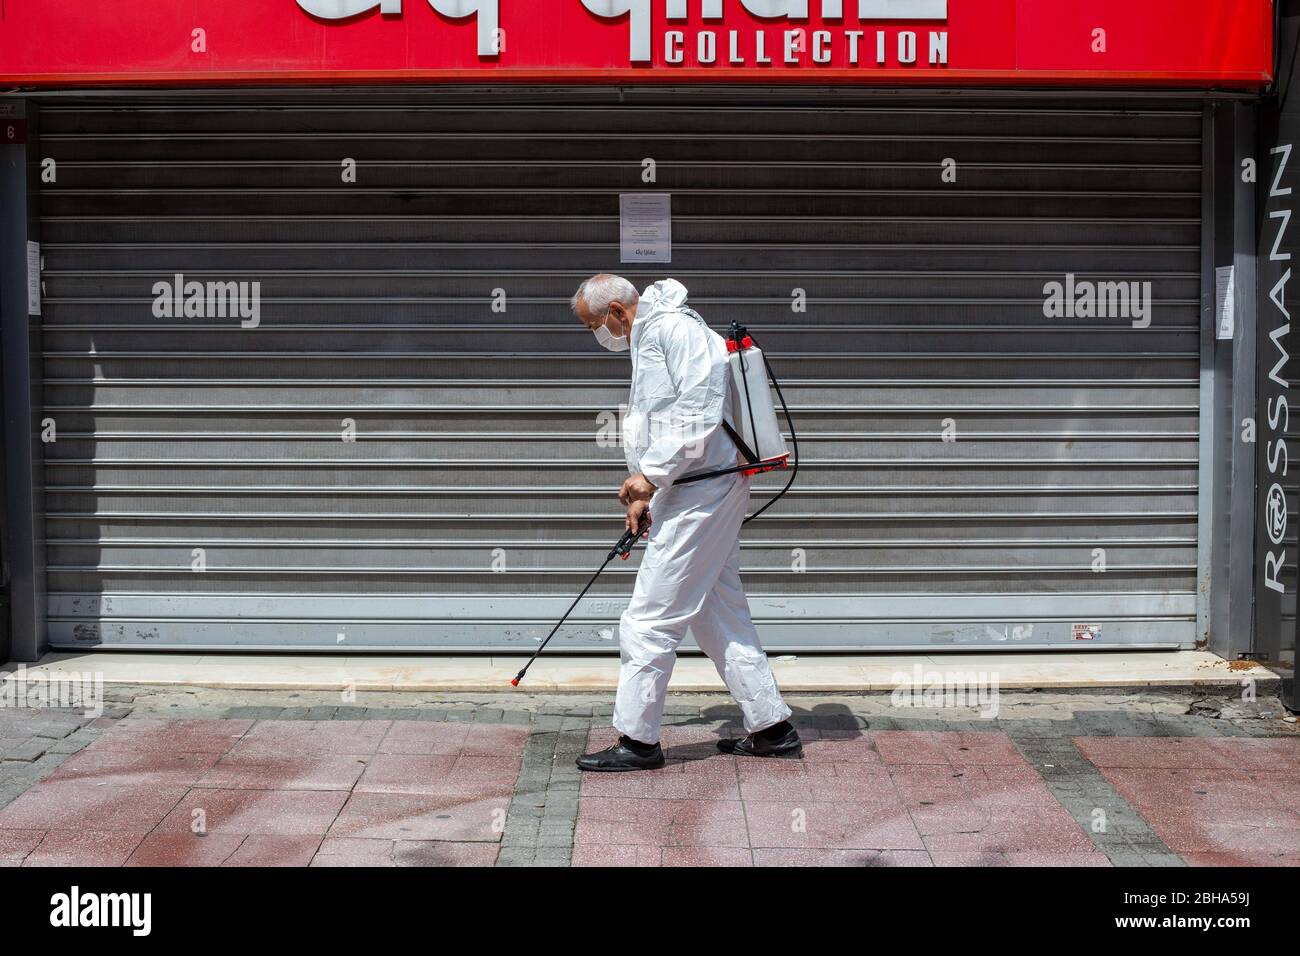 Istanbul, Turkey. 22nd Apr, 2020. A municipal official who disinfects the sidewalks at Bakirkoy streets before four days curfew during coronavirus days. Bakirkoy is a neighbourhood, municipality and crowded district on the European side of Istanbul. Turkey began enforcing a four-day curfew in 31 provinces as of midnight April 22 to prevent the spread of the novel coronavirus. As of April 22 Turkey's coronavirus death toll rises to 2,376 as cases top 98,000. Credit: Tolga Ildun/ZUMA Wire/Alamy Live News Stock Photo